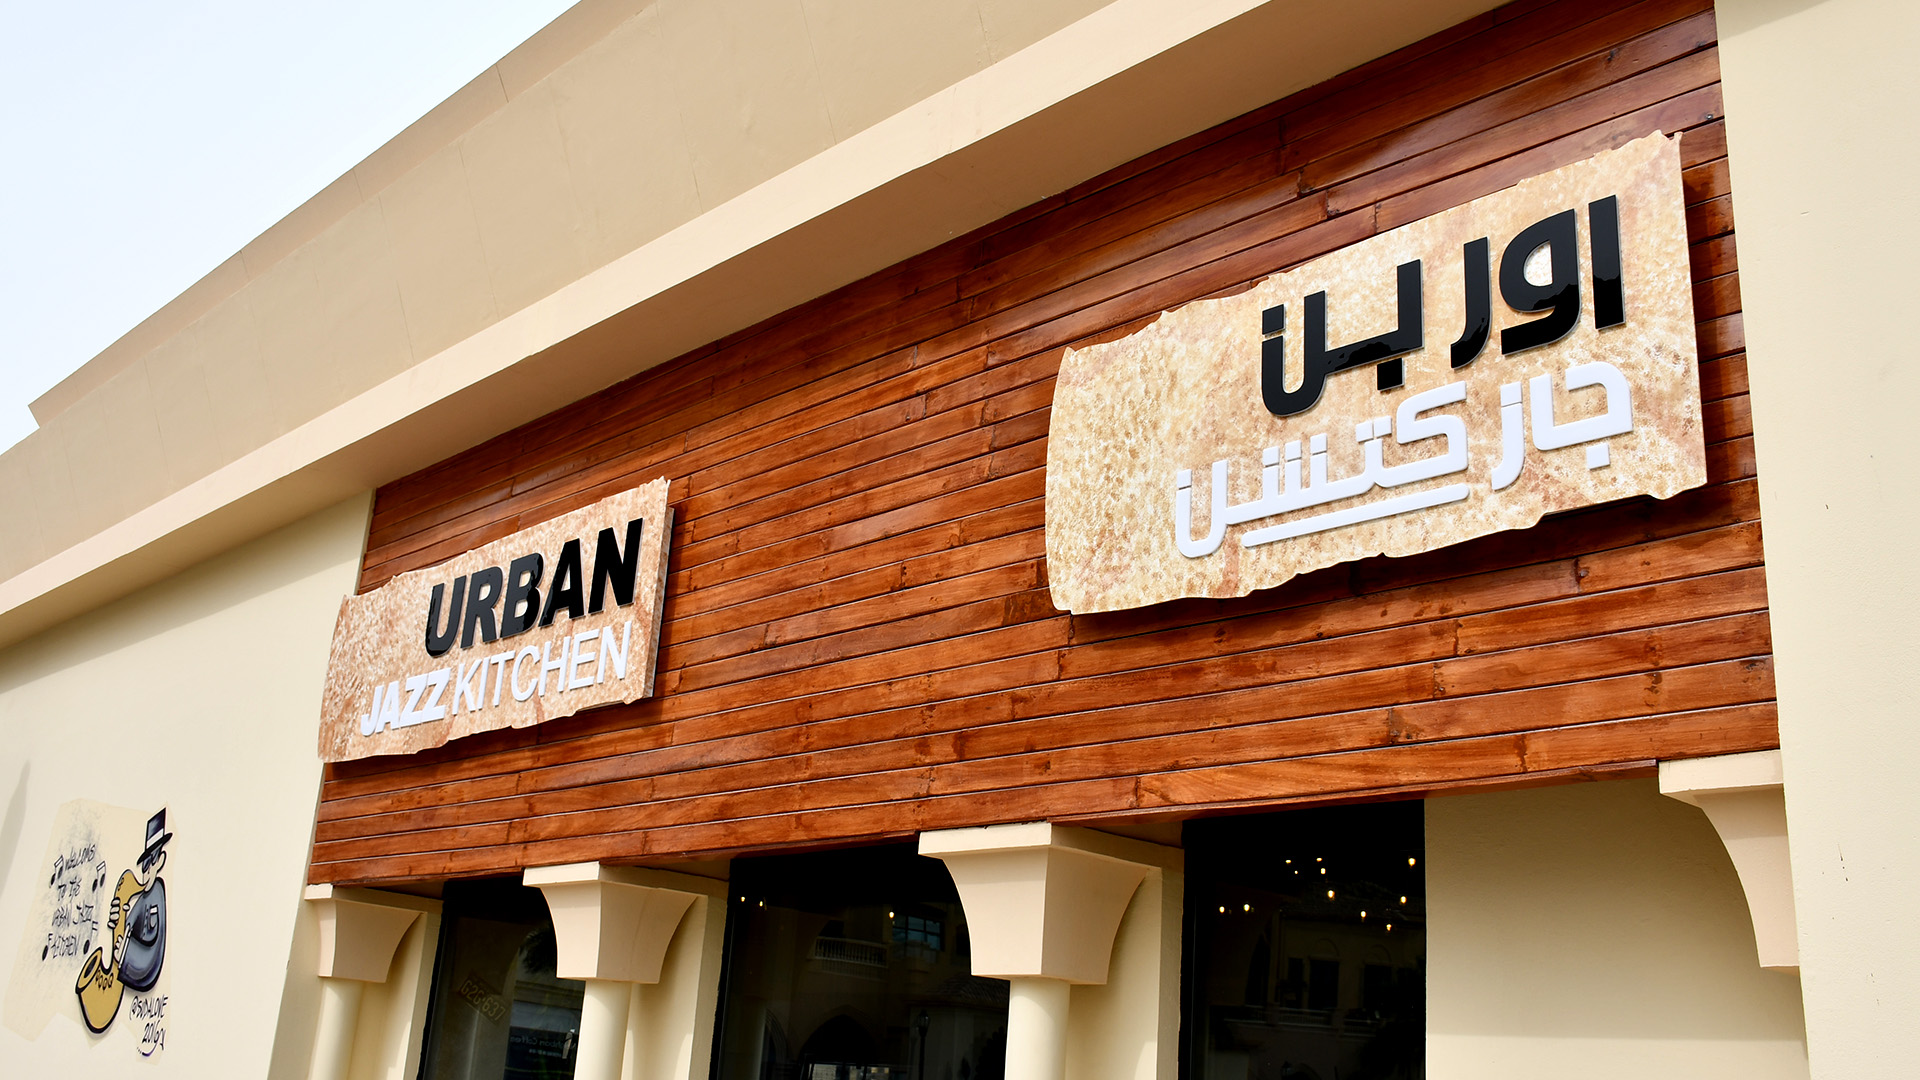 LED Lit Push Through shopfront signs for Urban Jazz Kitchen on The Pearl, fabricated and installed by ME Visual, Qatar